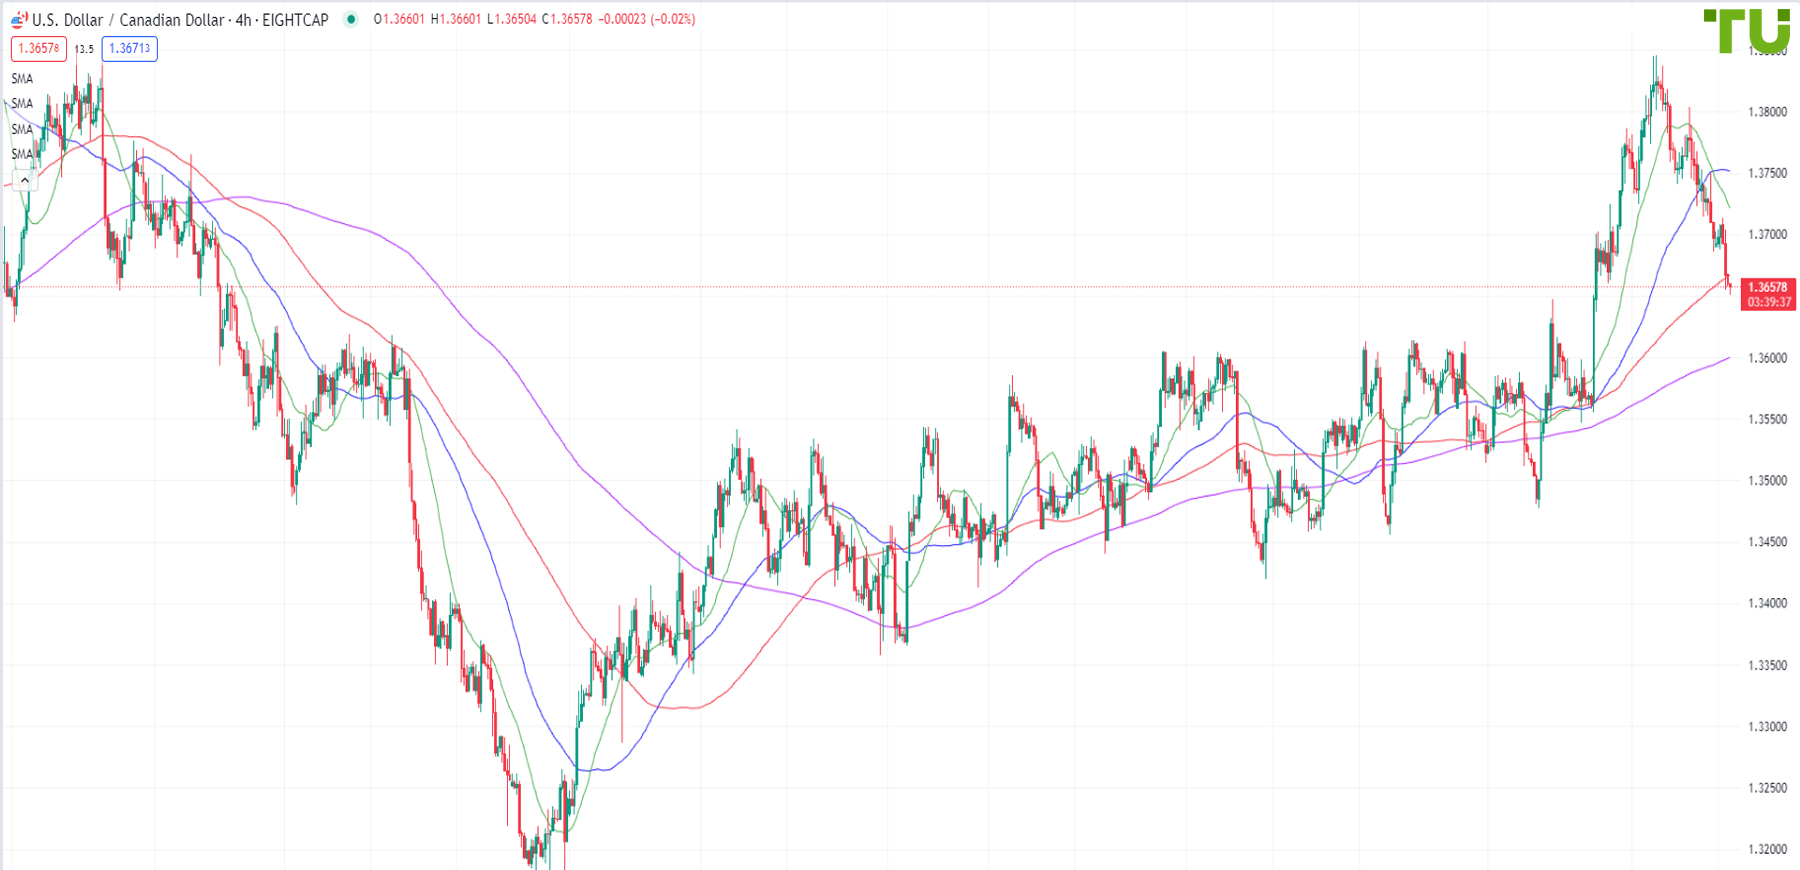 USD/CAD remains under selling pressure